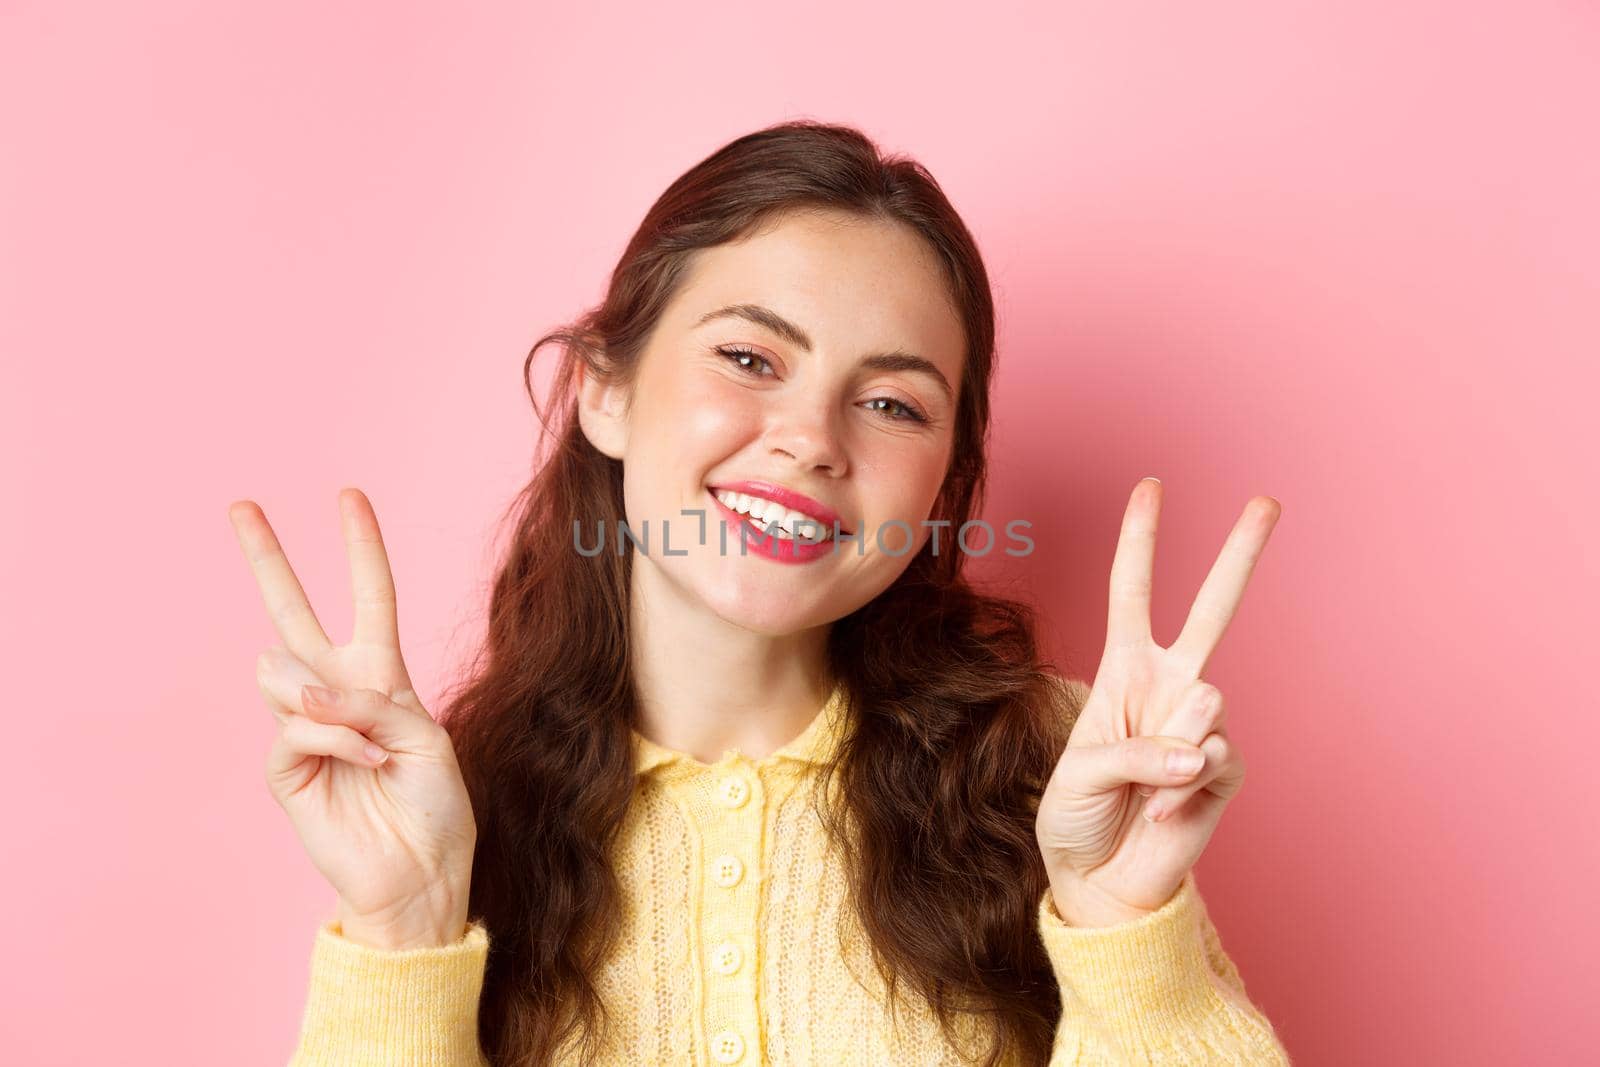 Close up of beautiful young woman showing peace v-sign and smiling happy at camera, wearing bright glam make up, standing against pink background.